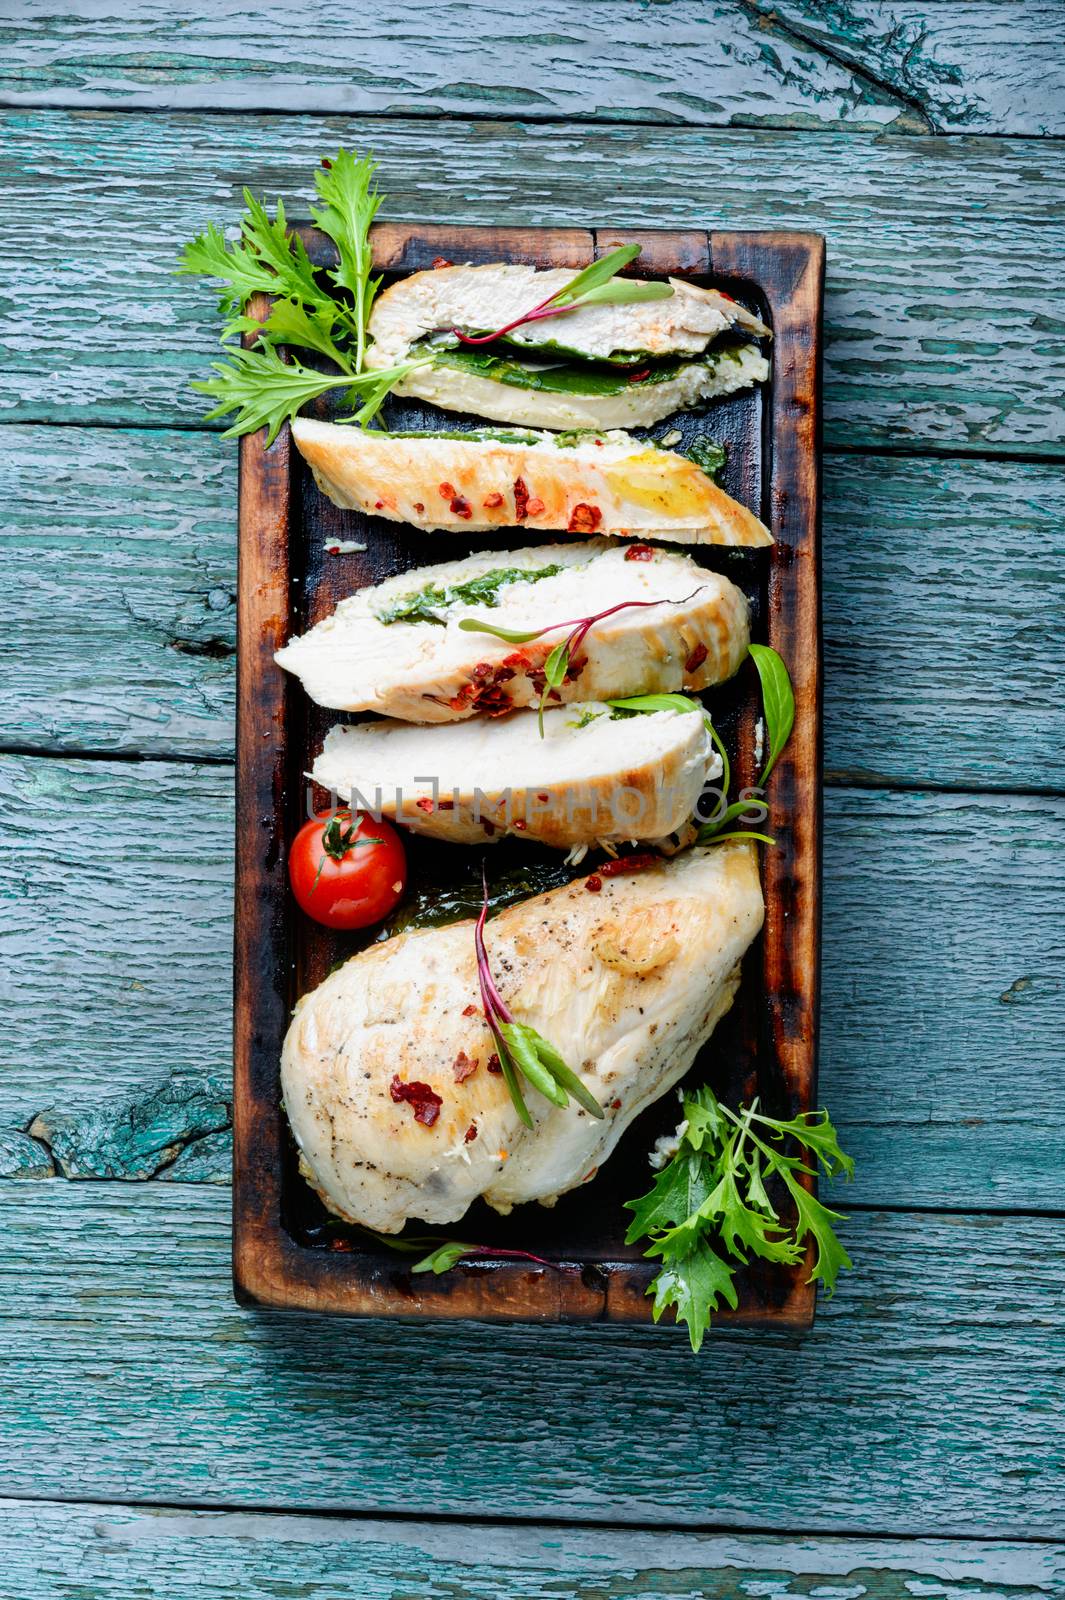 Delicious sliced turkey breast on wooden board.Baked chicken breast stuffed with greens.